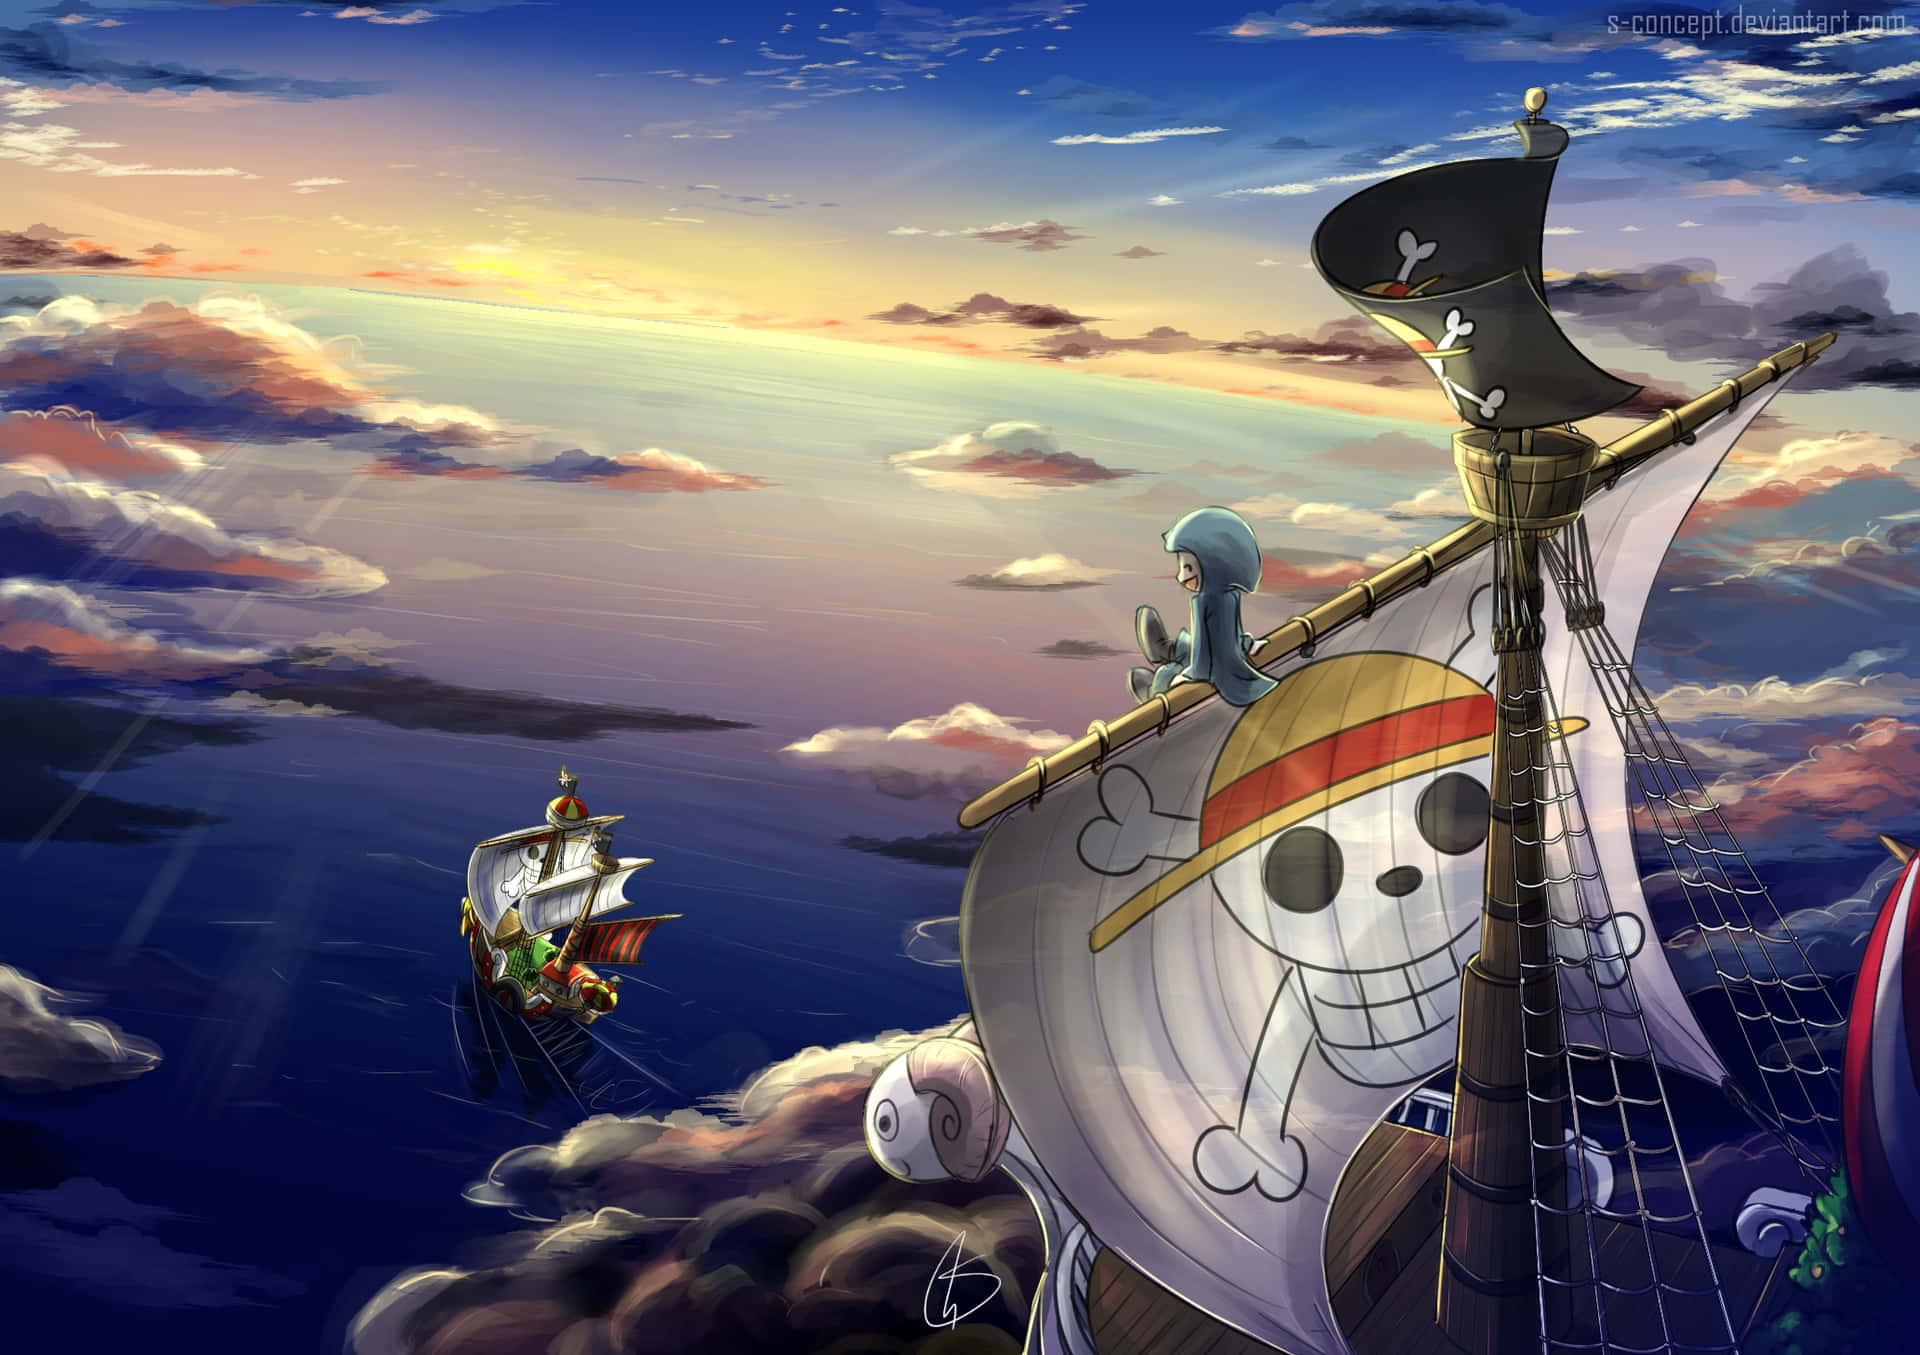 Join Luffy, Zoro and the rest of the Straw Hat Pirates aboard the Thousand Sunny Wallpaper